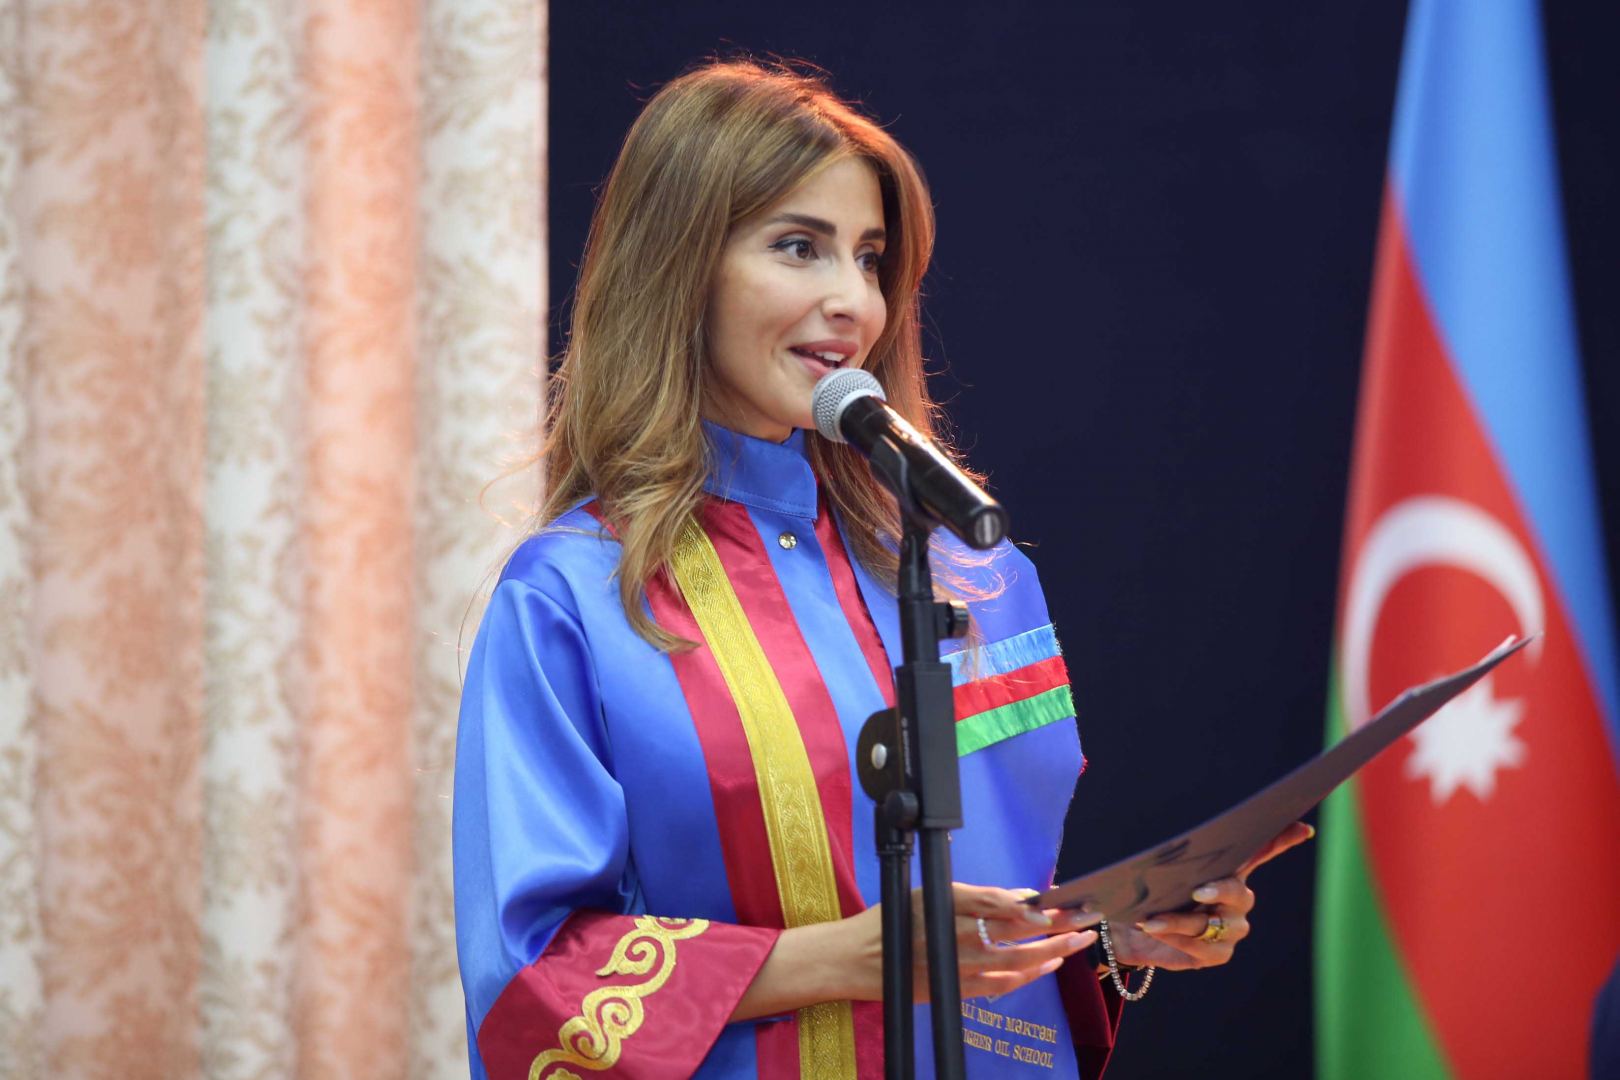 The Baku Higher Oil School of SOCAR has hosted another Graduation Day (PHOTO)